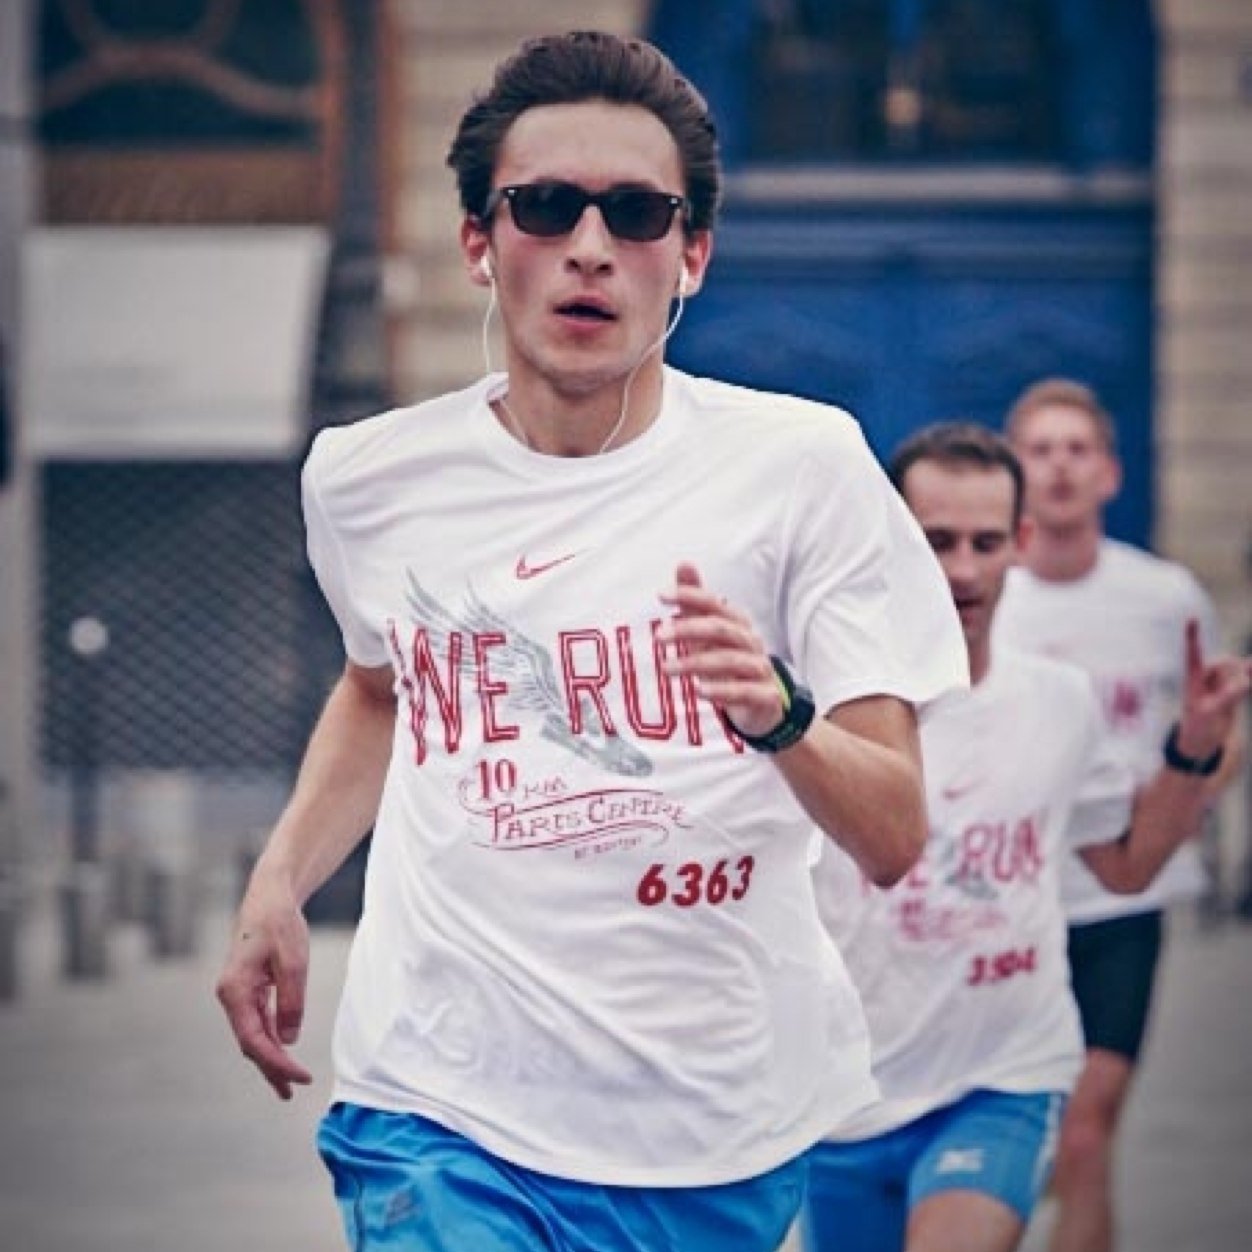 7th place Wings For Life World Run 2014, France / 158th Global Ranking 
https://t.co/D53HIBvQF4